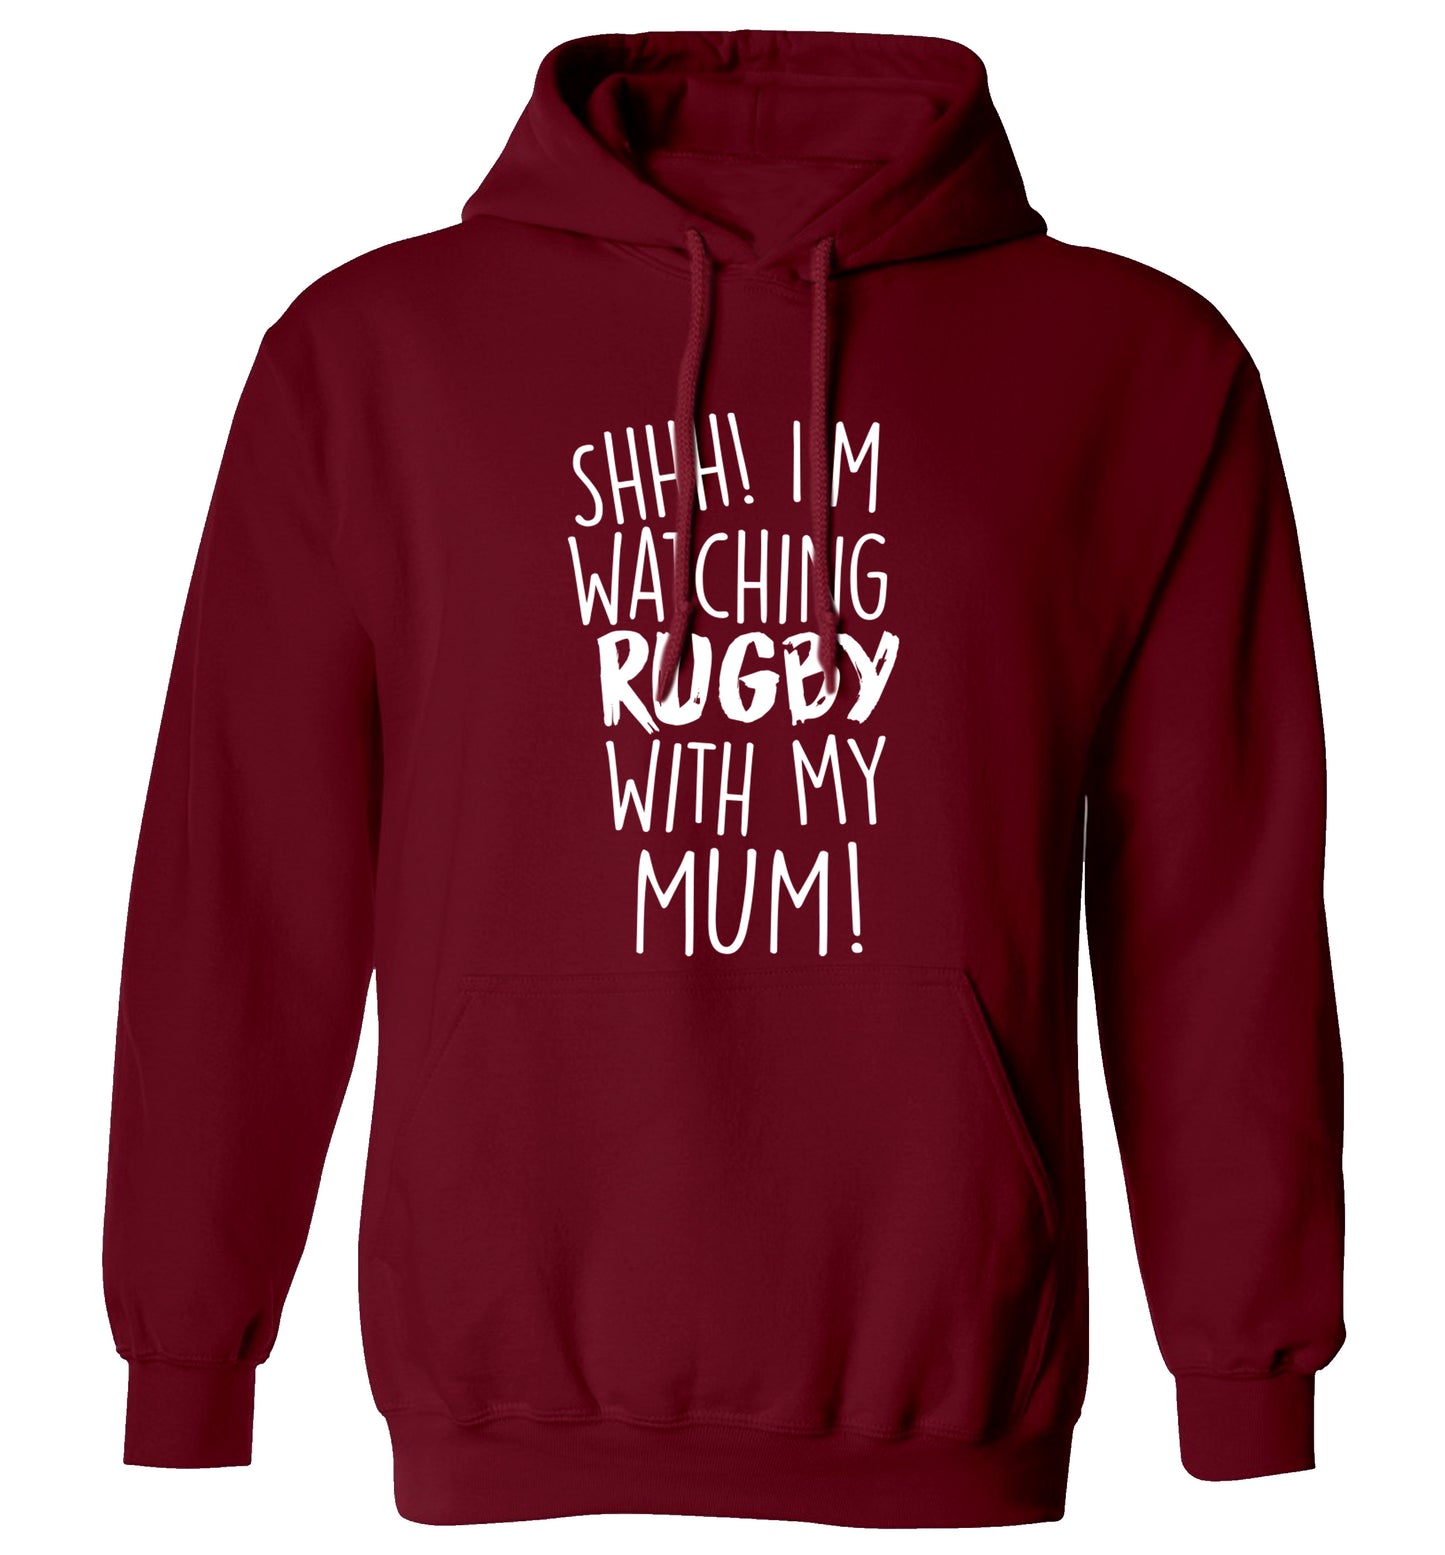 Shh... I'm watching rugby with my mum adults unisex maroon hoodie 2XL